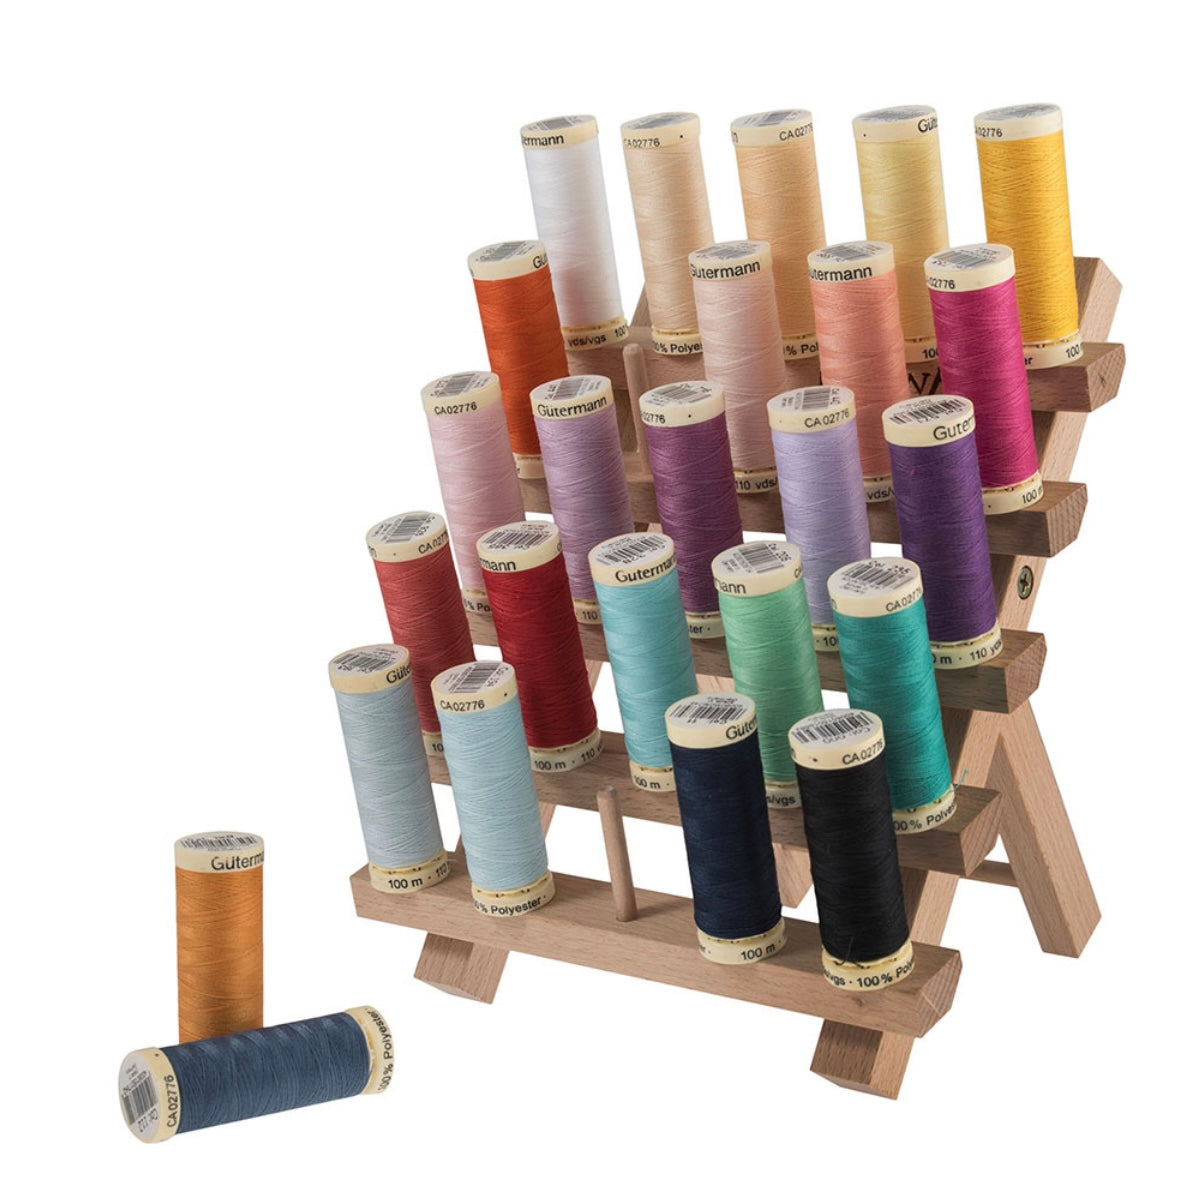 Wooden Thread Stand - Beech Wood - Holds 25 Spools